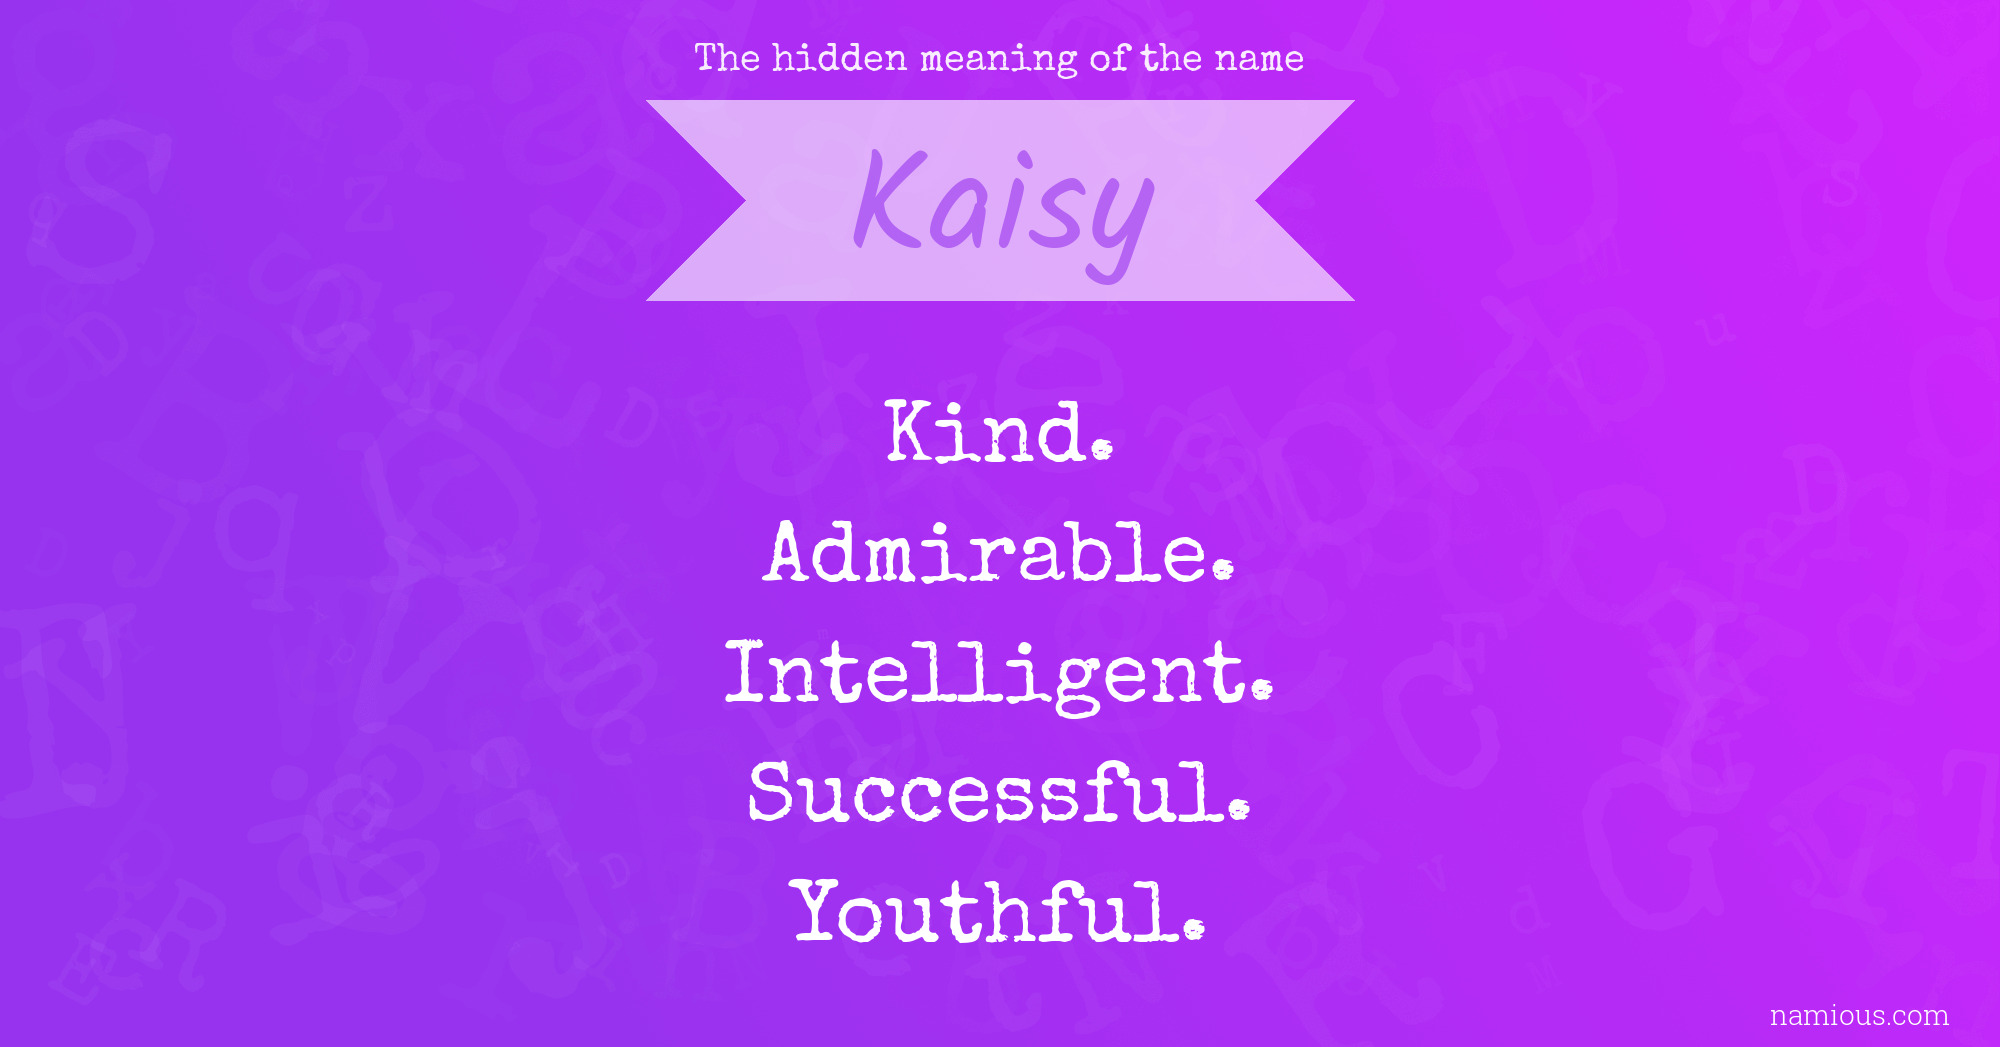 The hidden meaning of the name Kaisy